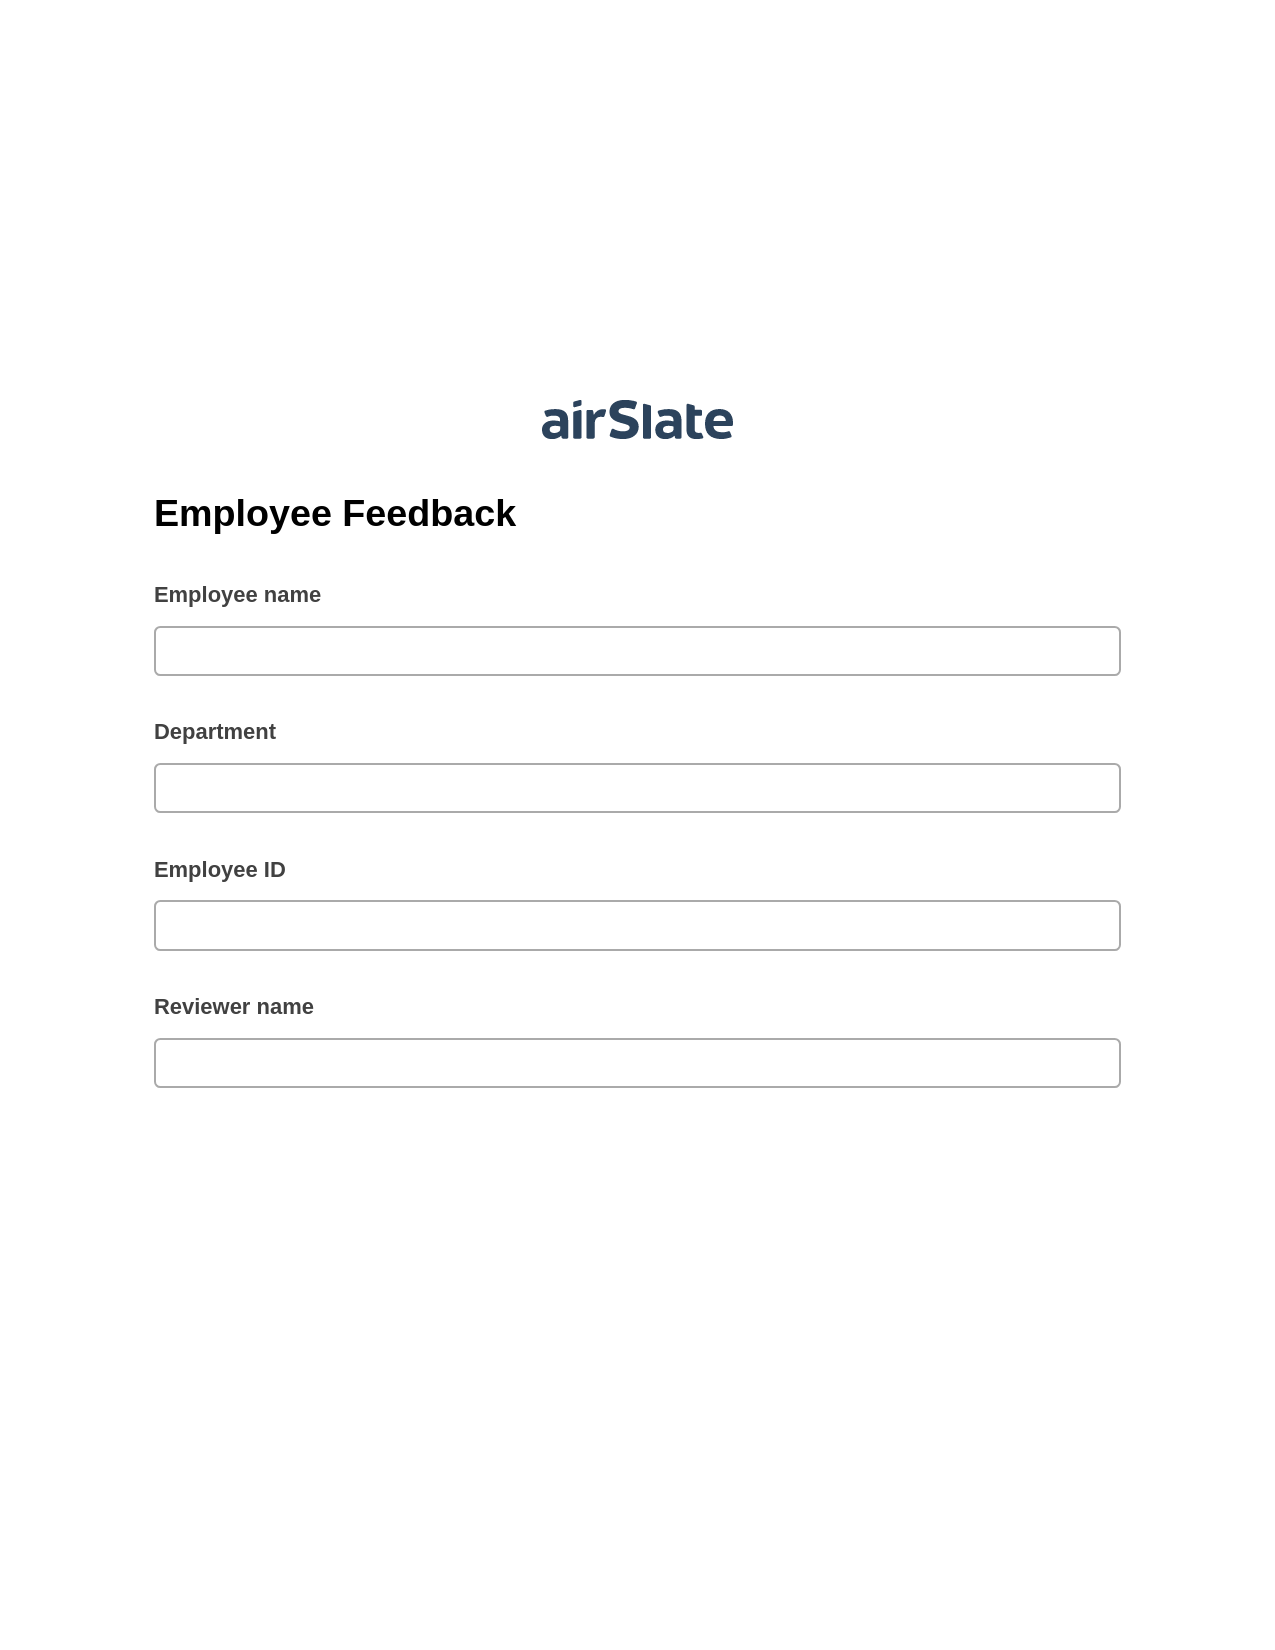 Employee Feedback Pre-fill from Salesforce Records with SOQL Bot, Set signature type addon, Export to Excel 365 Bot